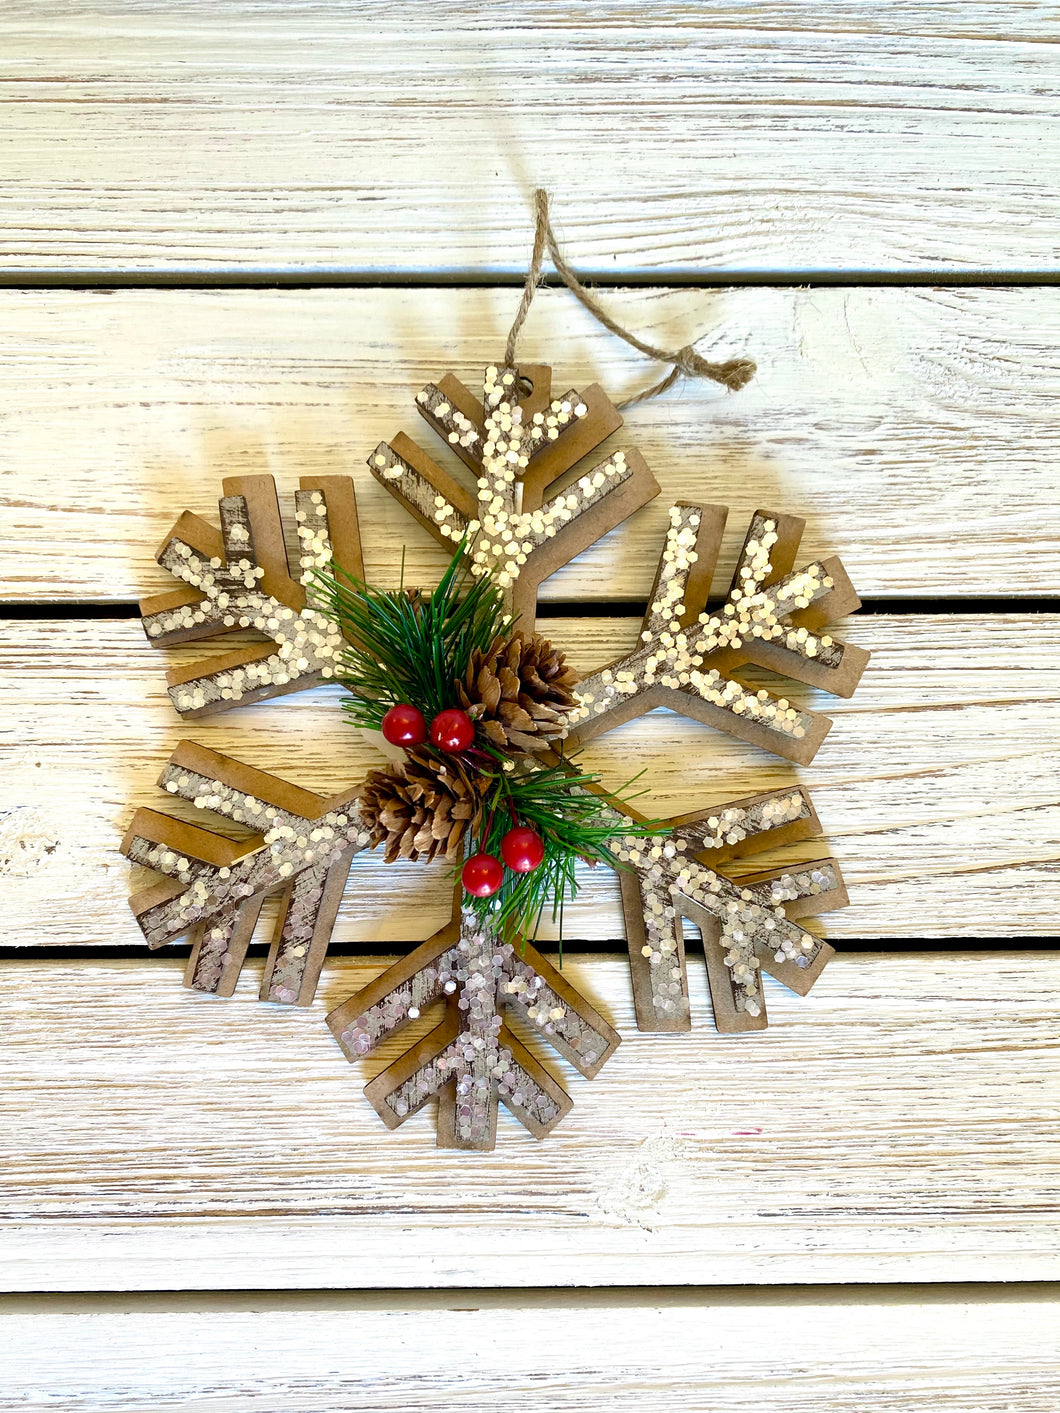 Snowflake Ornament with Pine Cones